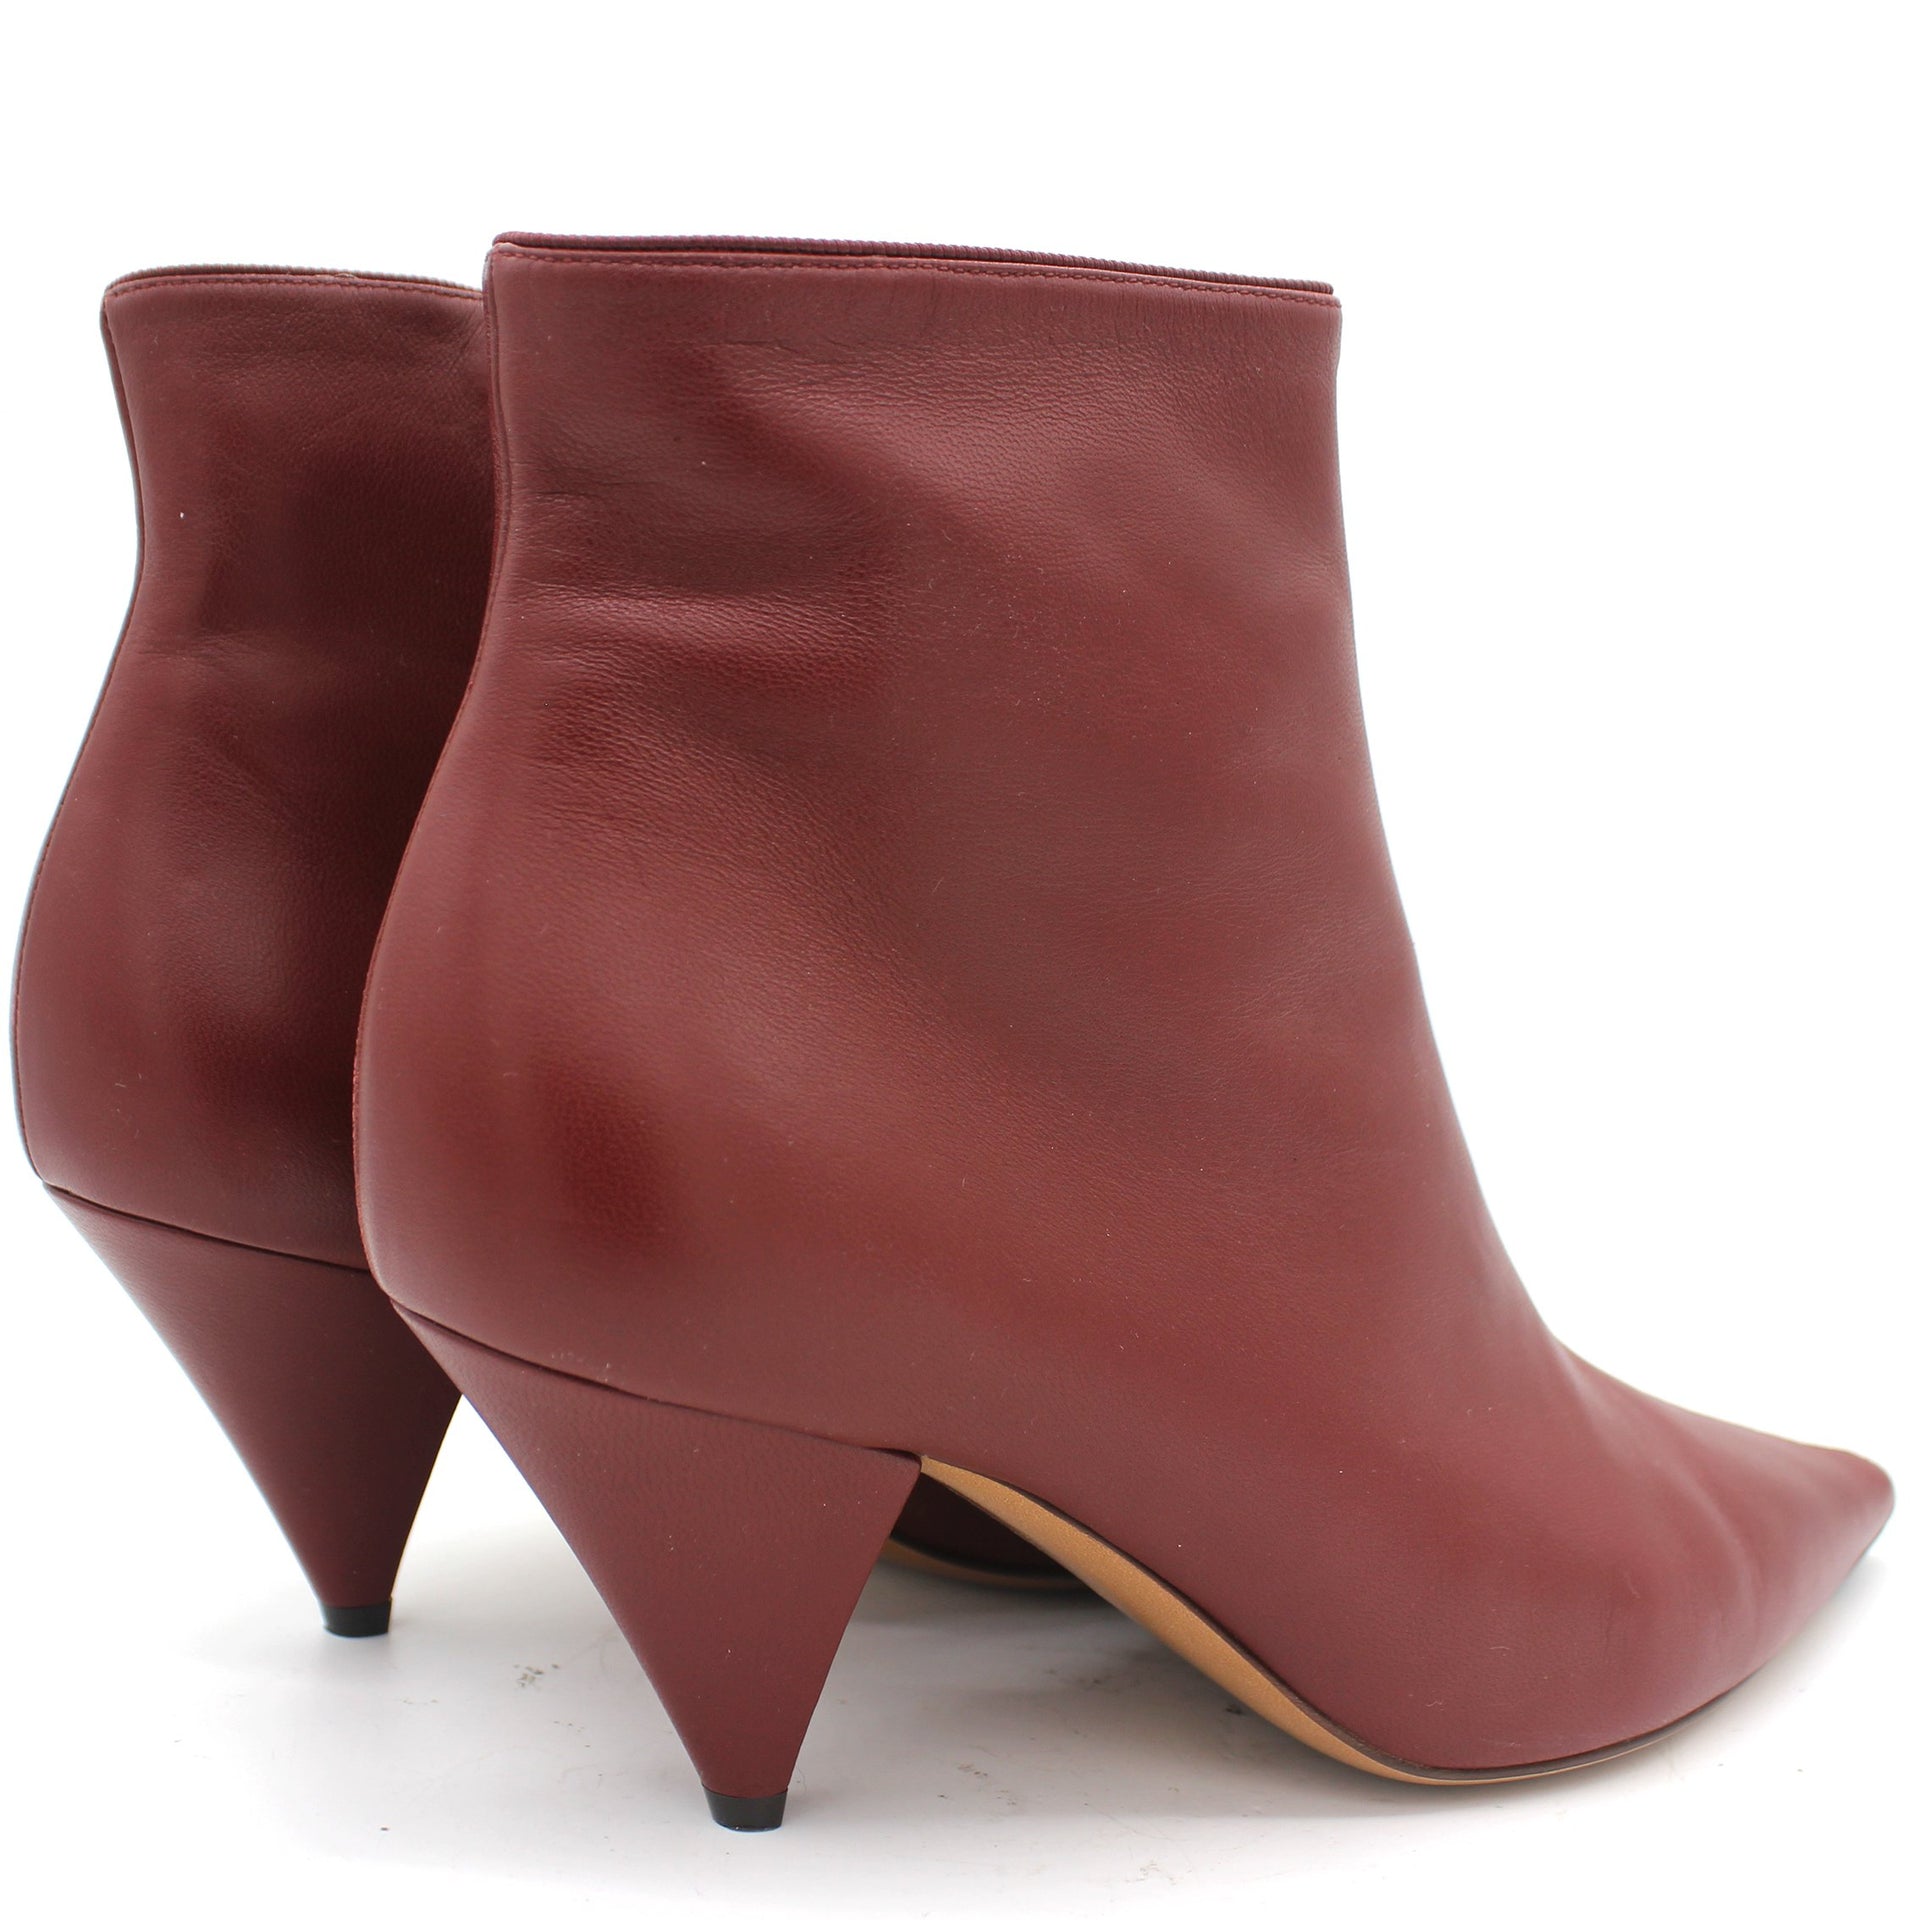 Ankle Boots Burgundy 37